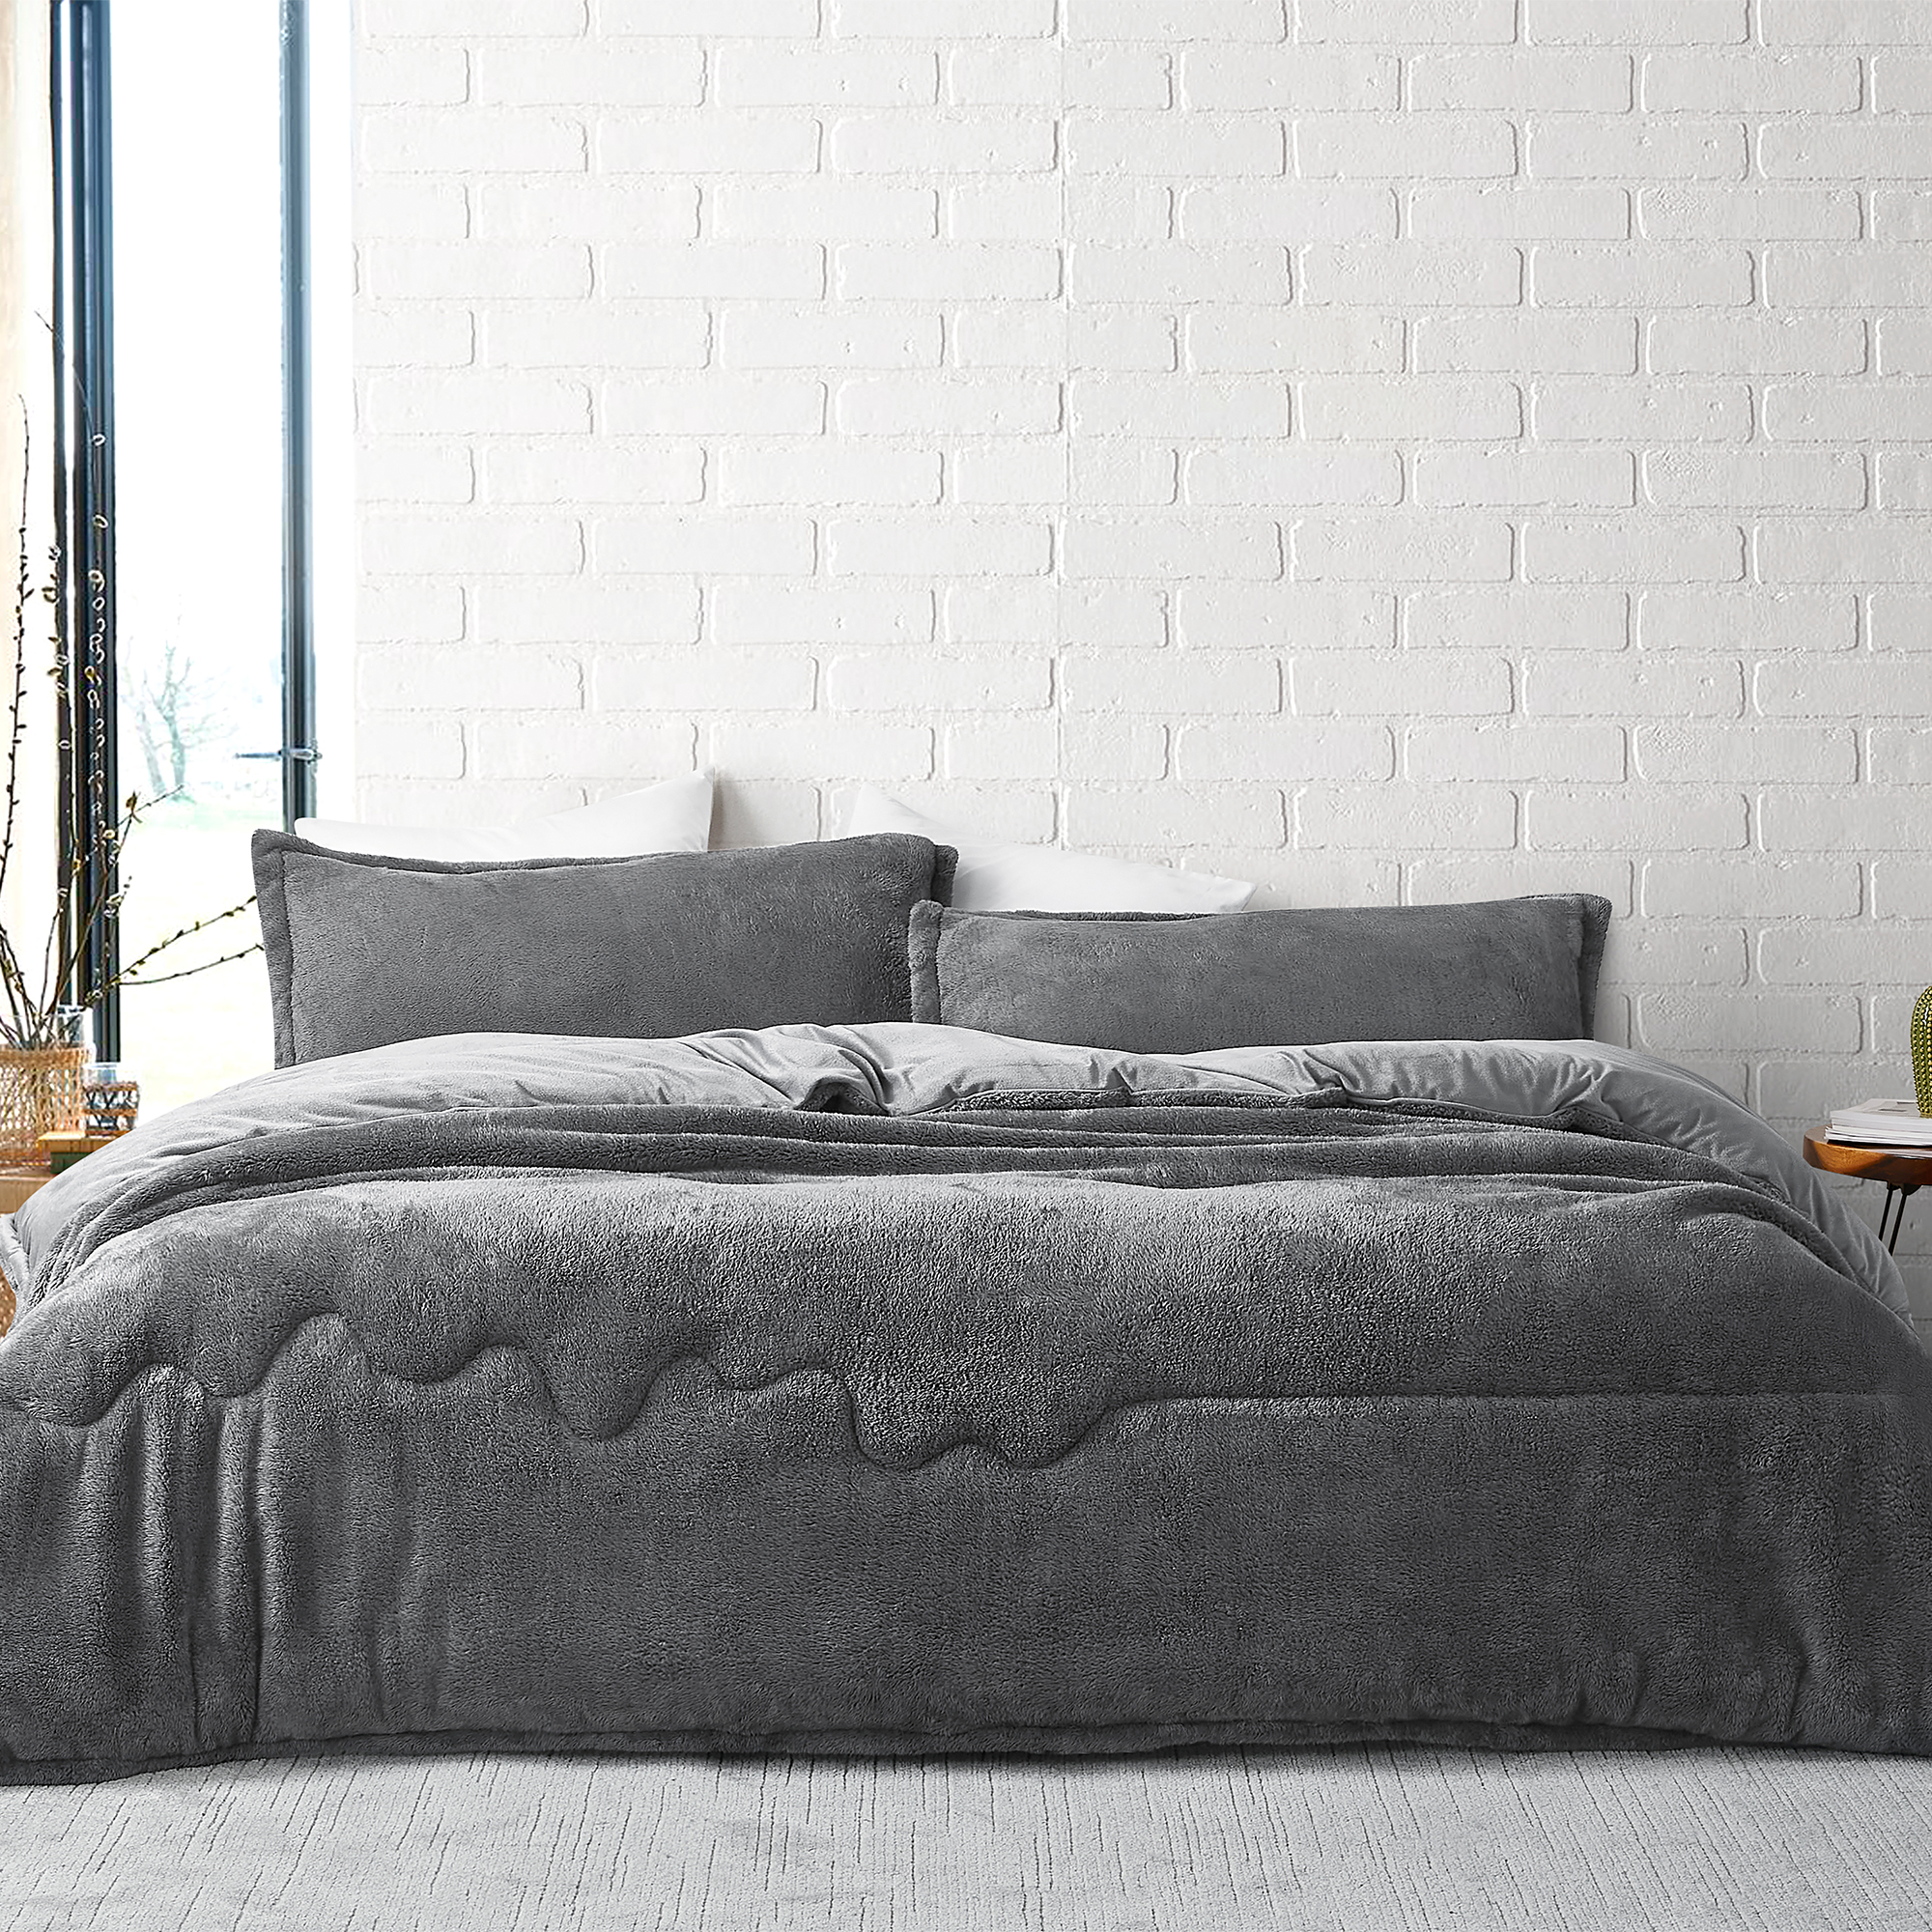 Crooked Line - Coma Inducer Comforter - Steel Gray